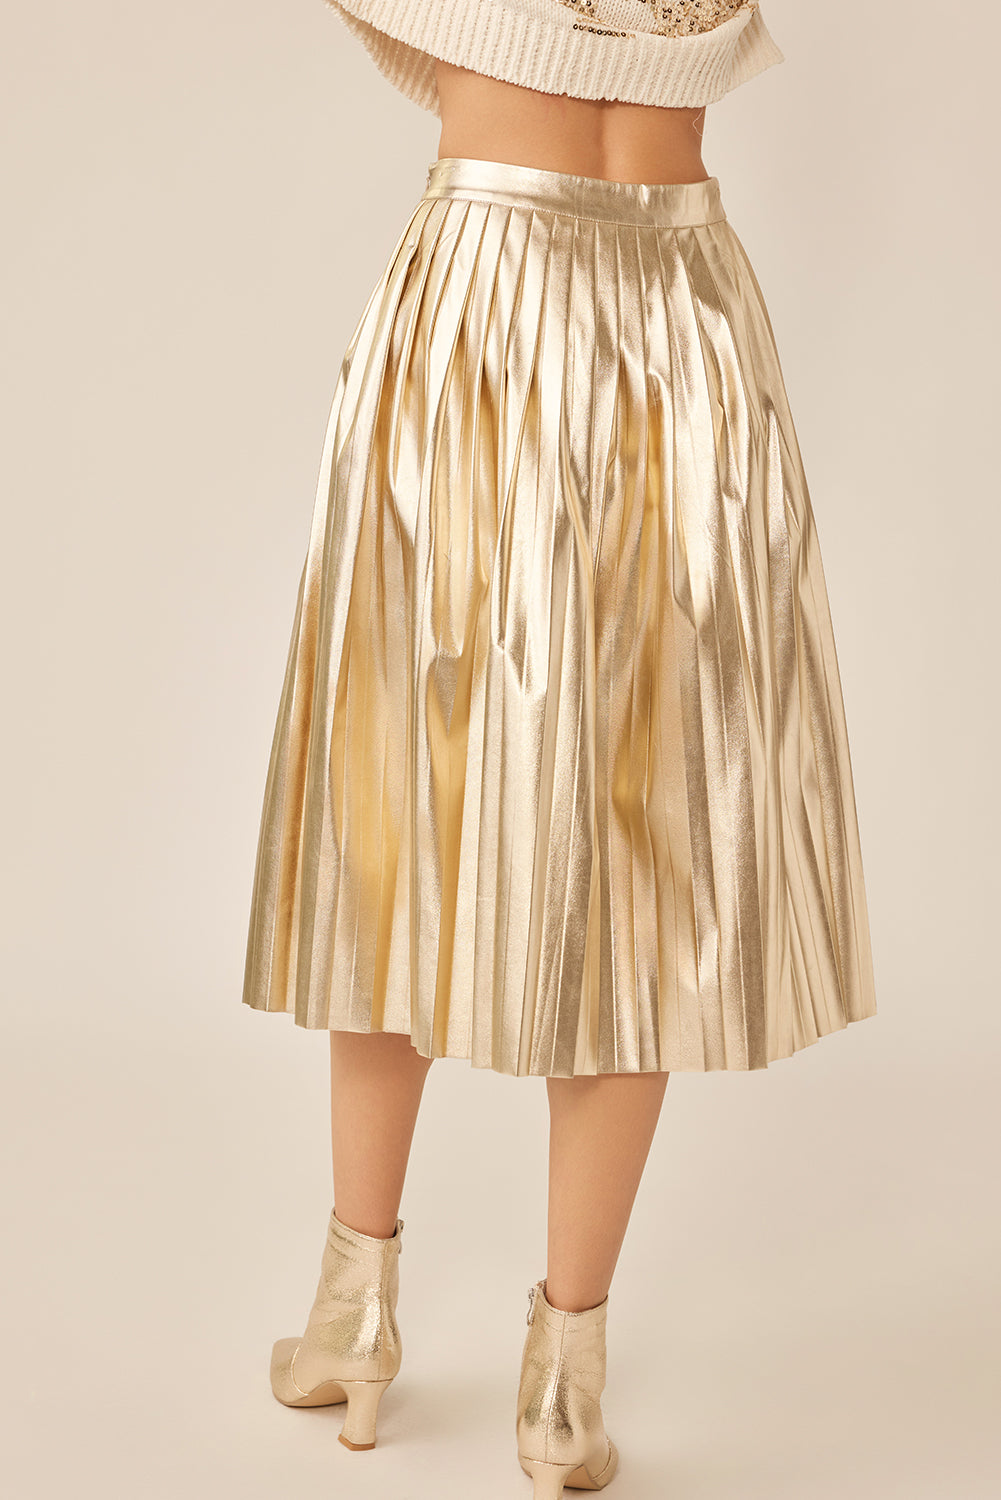 "Biltmore" Metallic Faux Leather Pleated Skirt - Gold